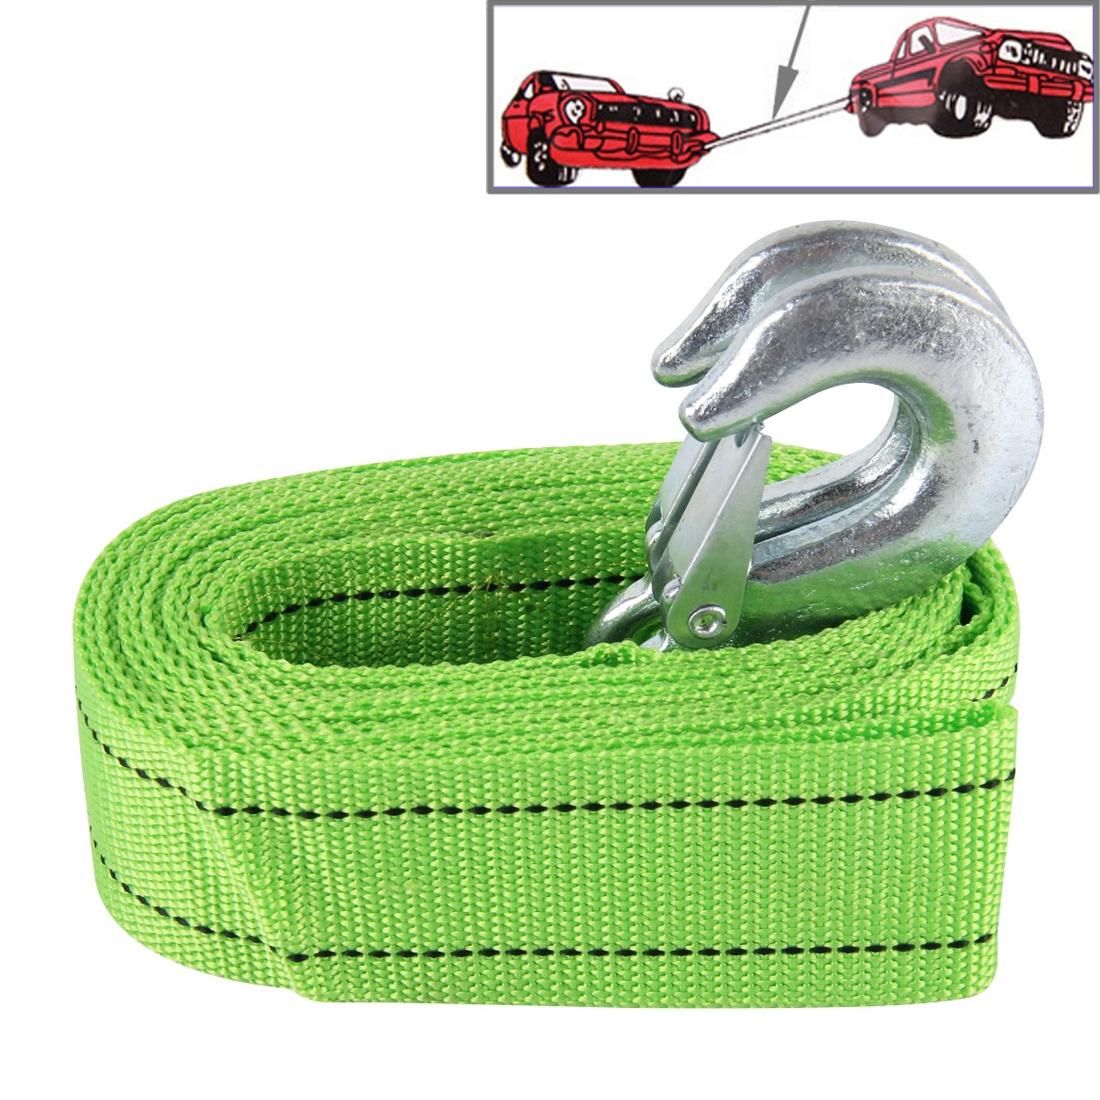 ZONGYUAN 3m�4cm 3 Ton Car Elastic Force Towing Rope Straps with Two Hooks High Strength Cable Cord Heavy Duty Recovery Securing Accessories for Cars Trucks (Green)